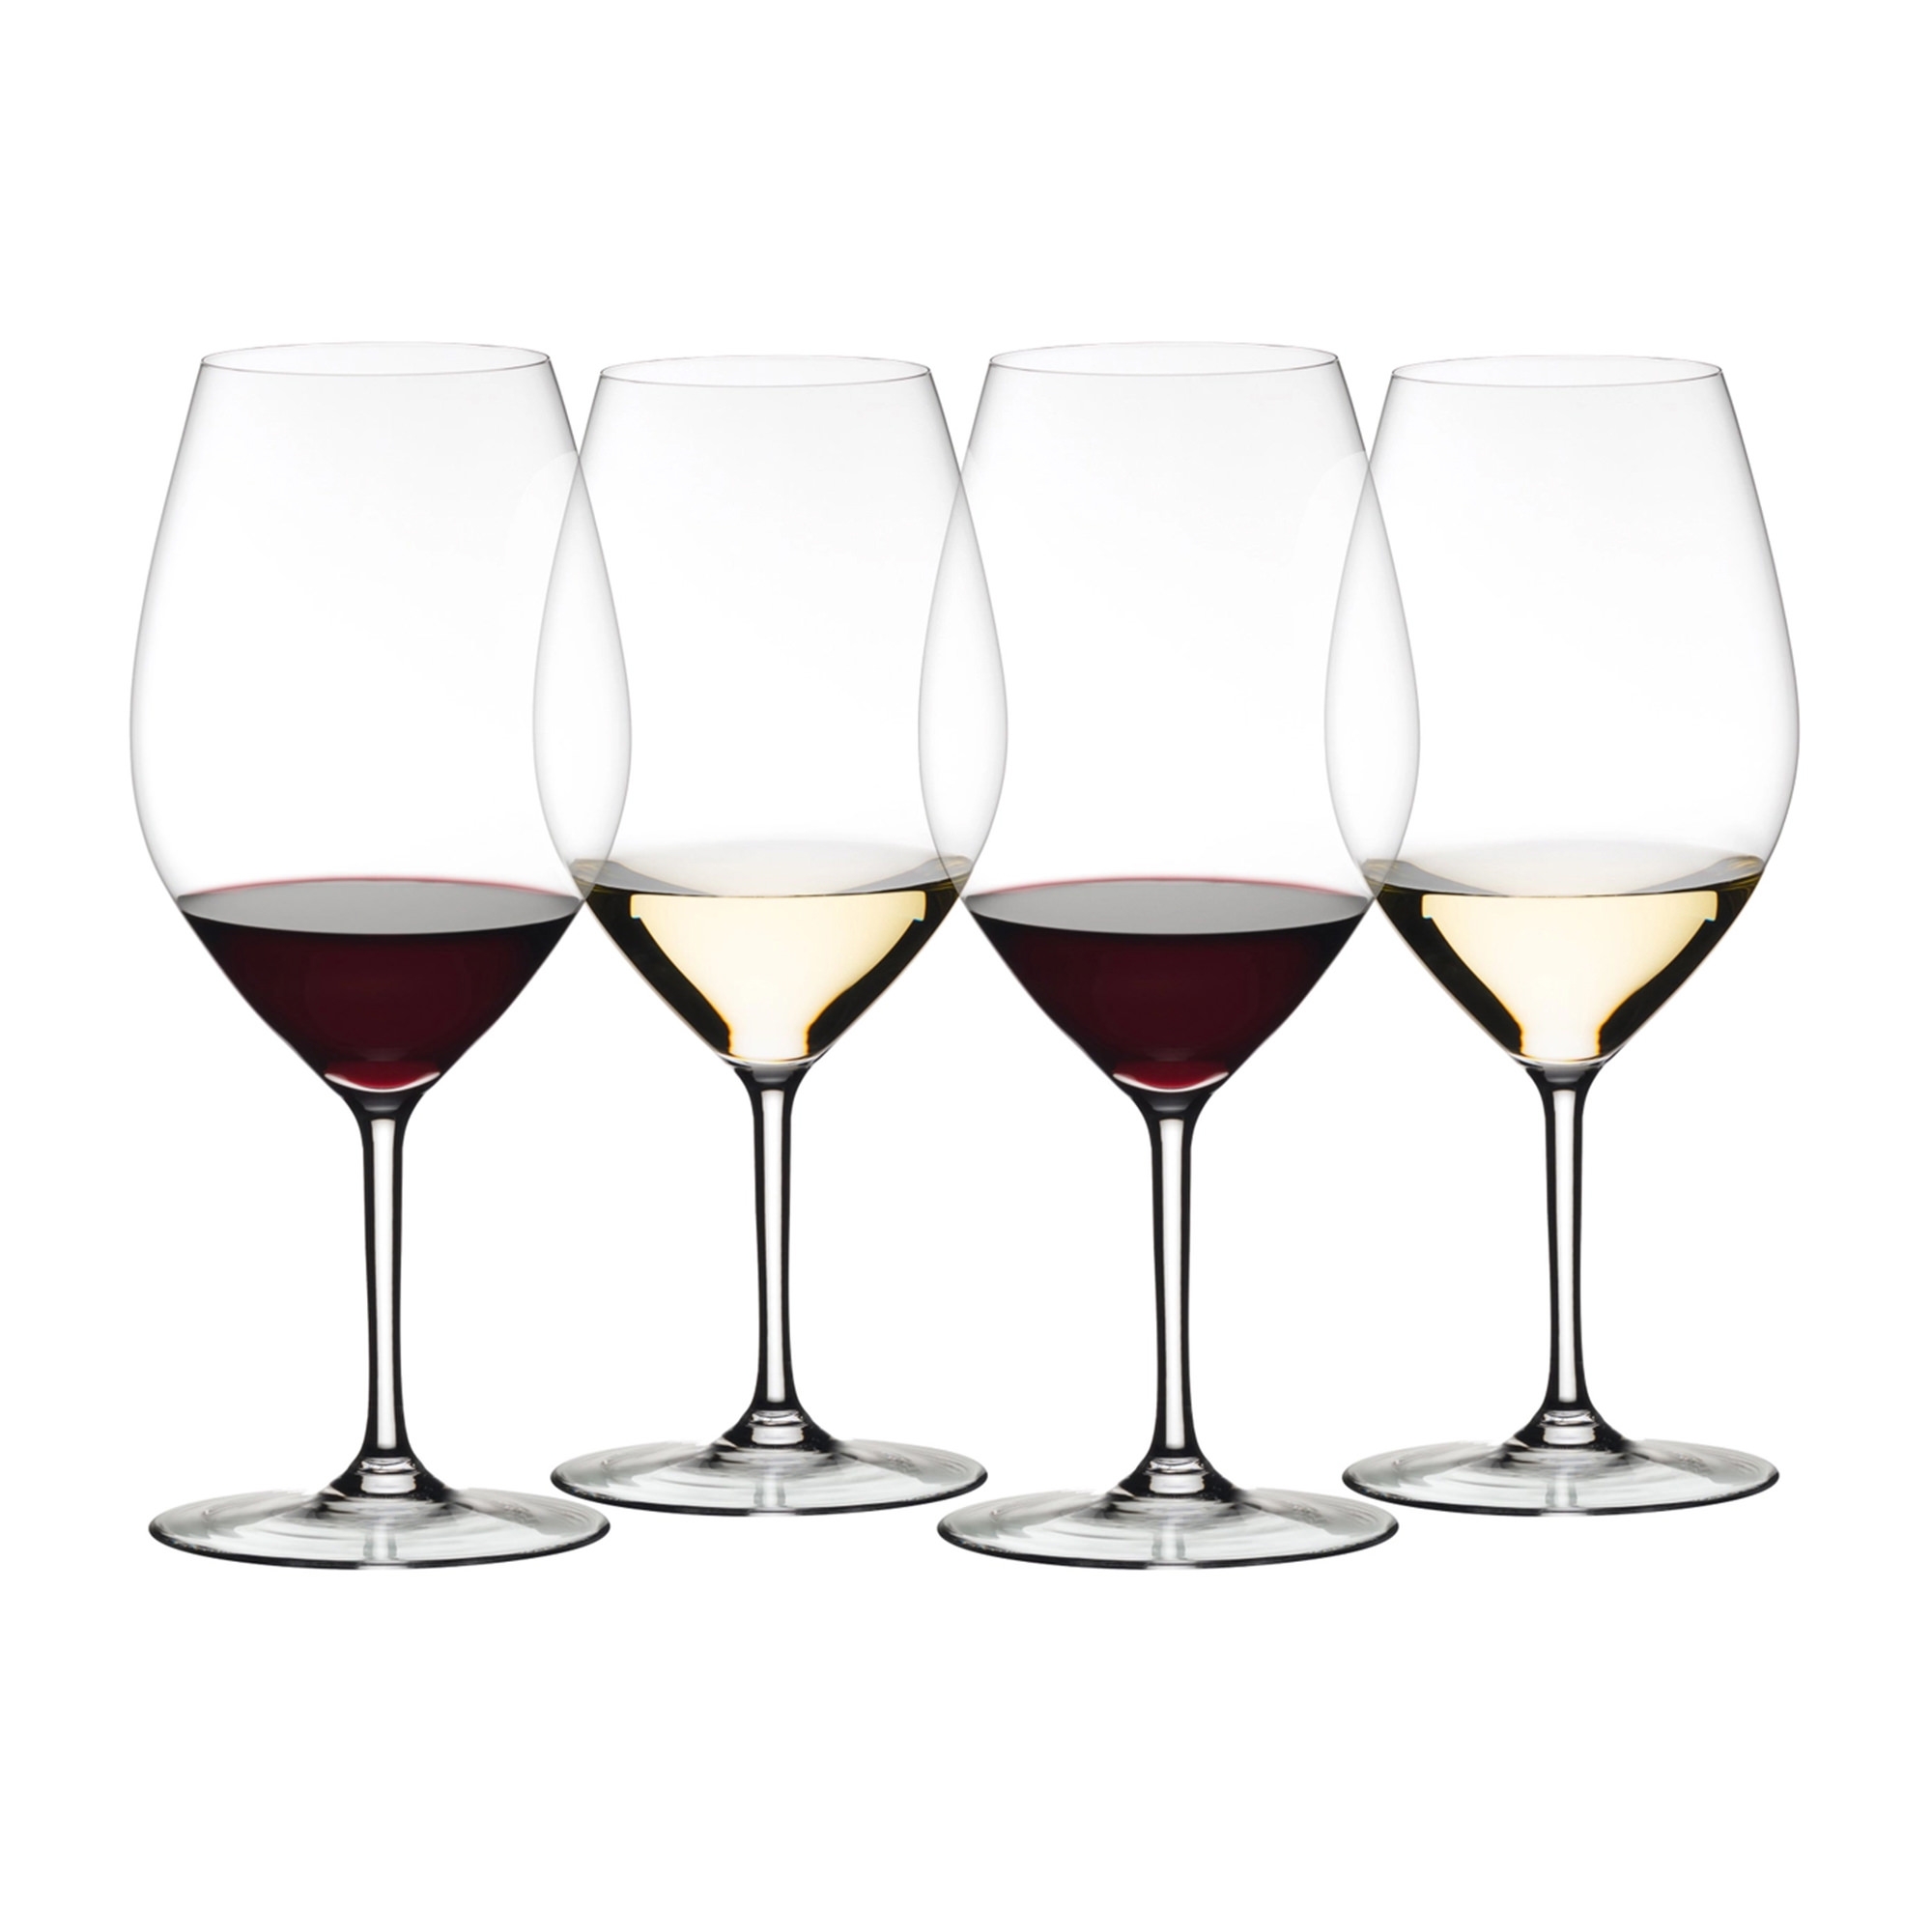 Riedel Wine Friendly Magnum Glass 995ml Set of 4 Image 1